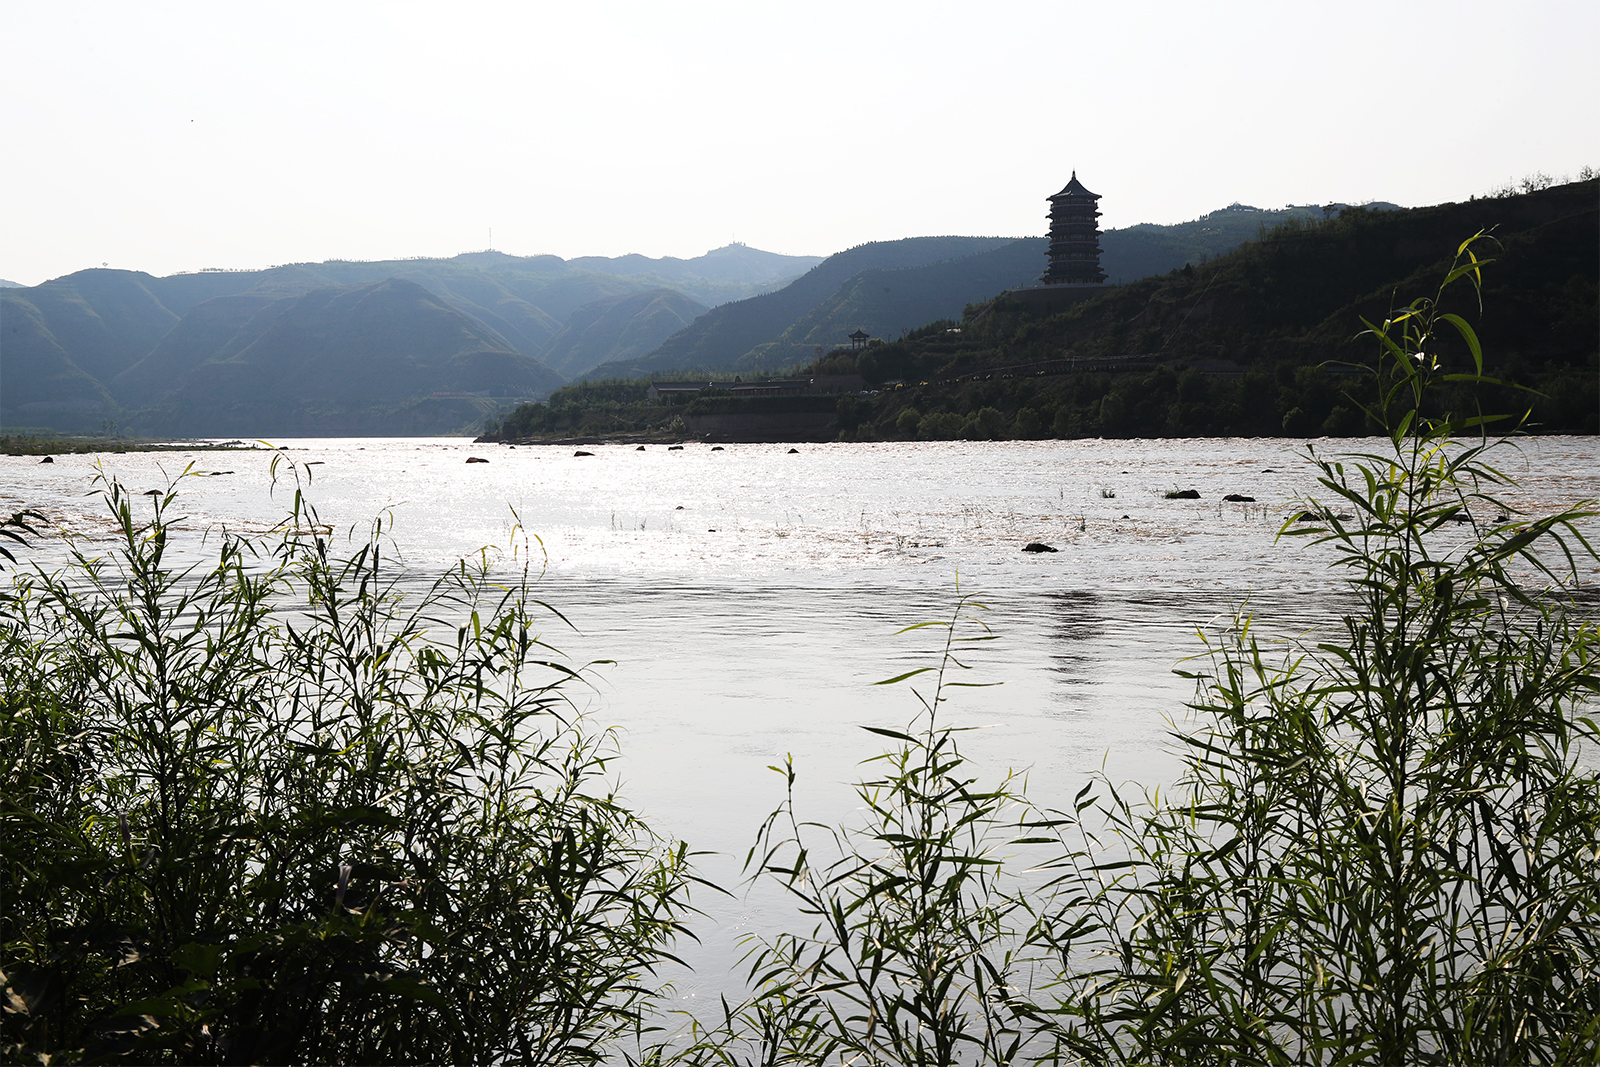 A view of the Yellow River, and Wubu County in Shaanxi Province across the river, from Qikou Ancient Town in Lvliang, Shanxi Province./CGTN